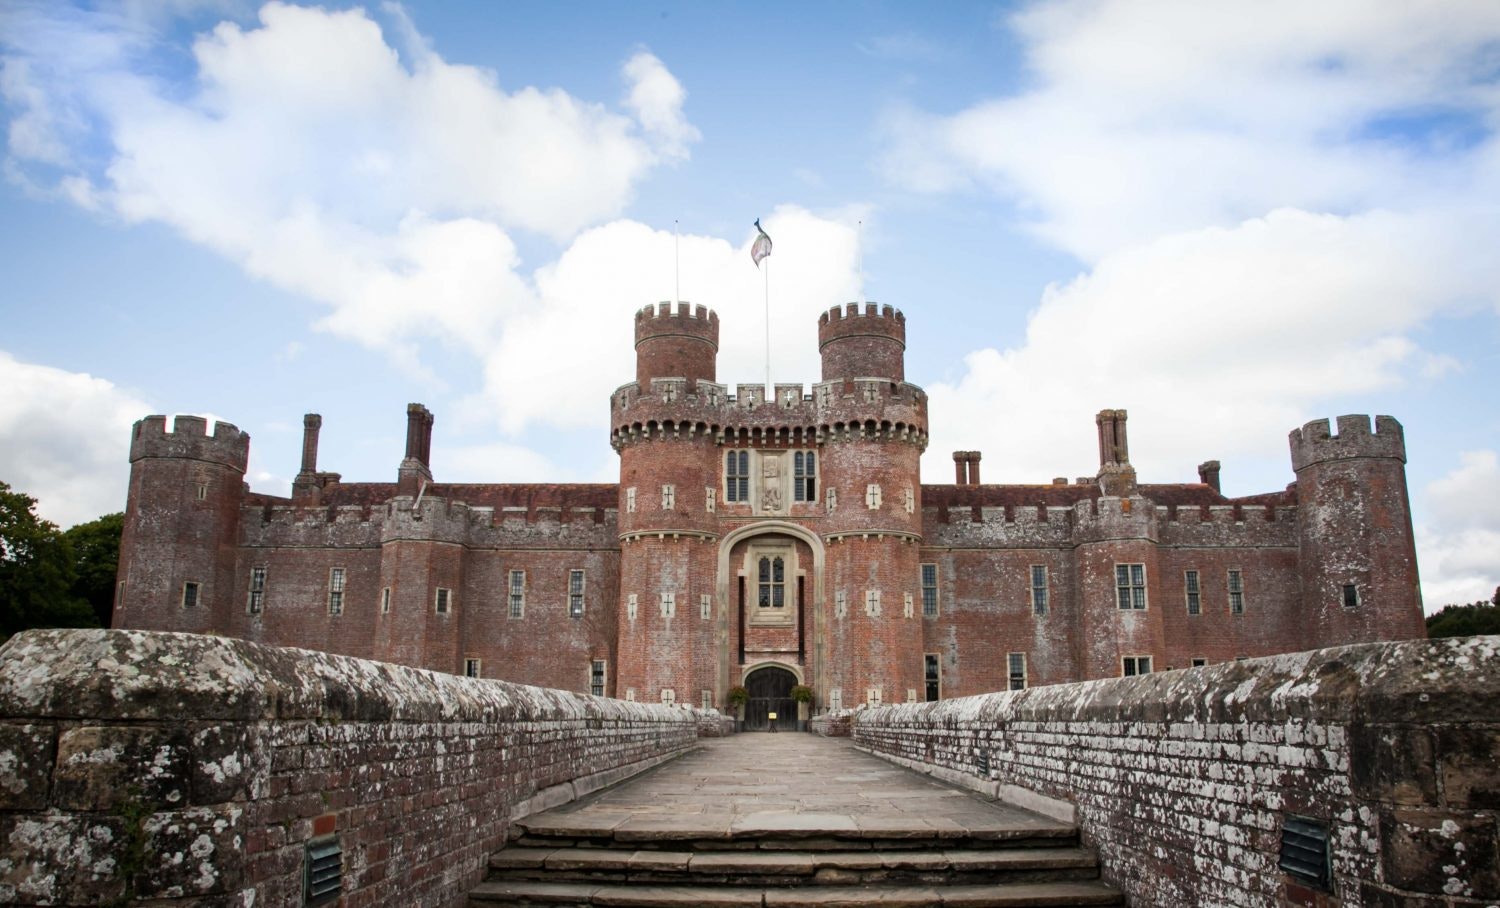 Herstmonceux Castle, which dates from the 15th century